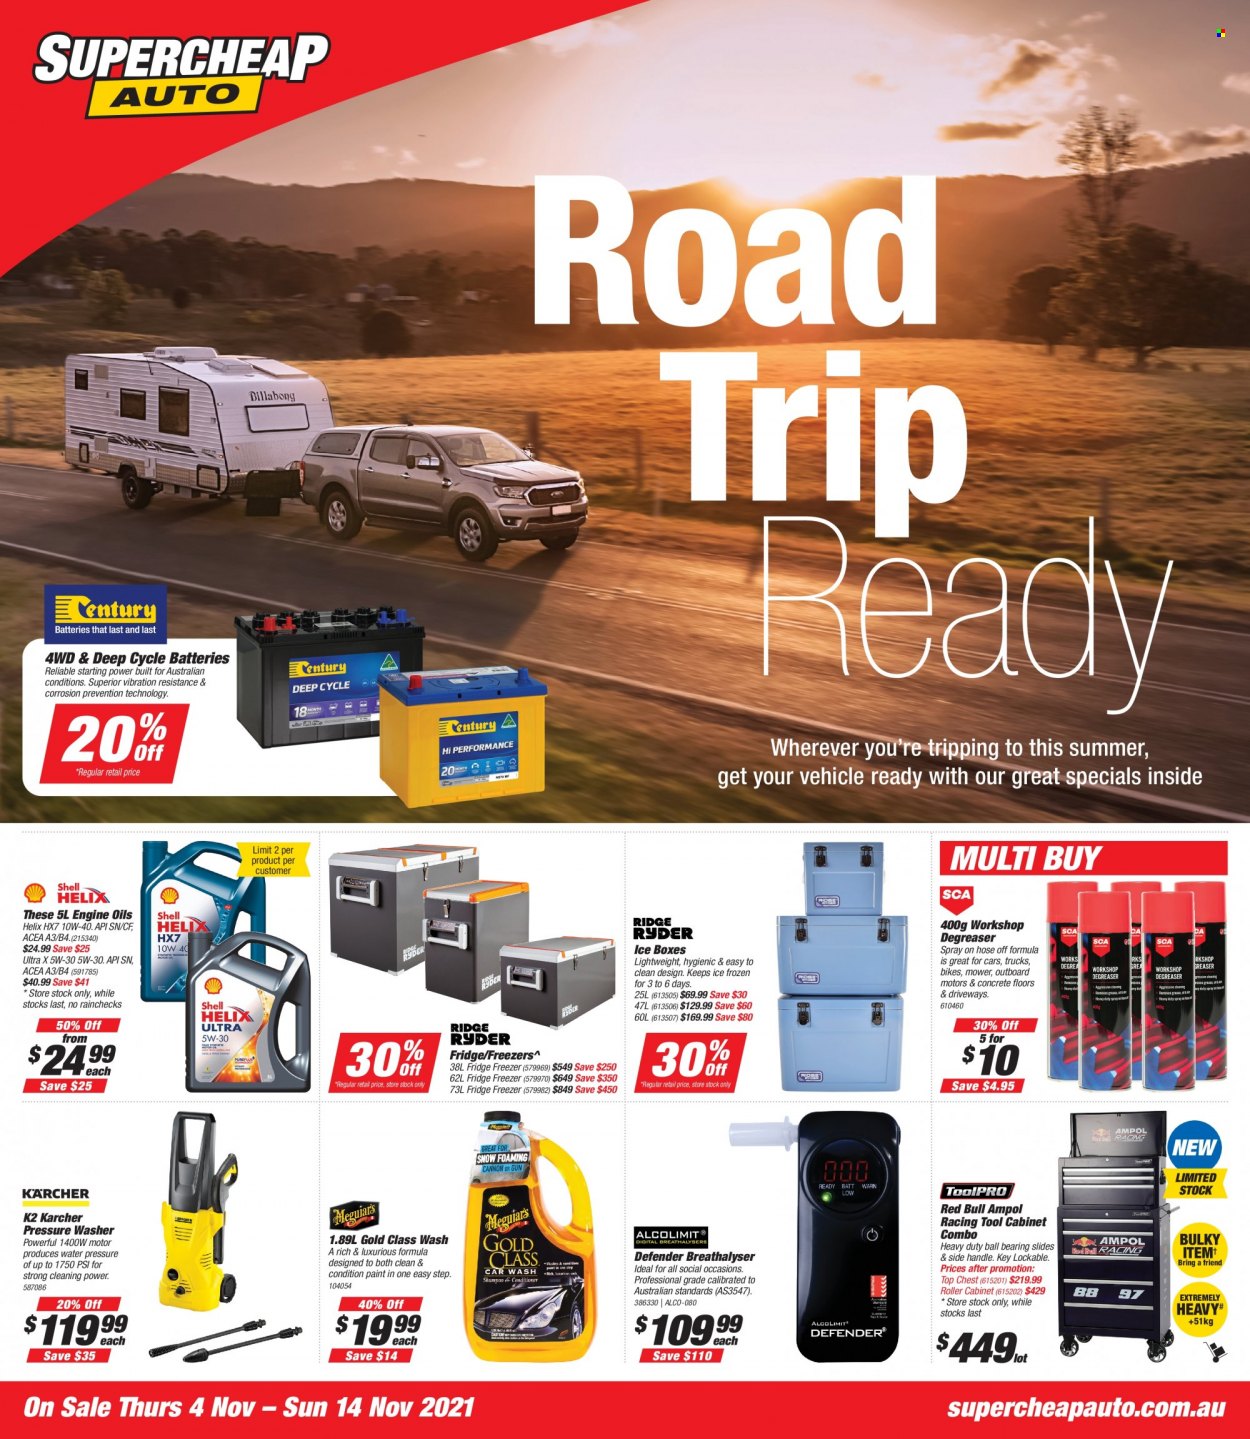 thumbnail - Supercheap Auto Catalogue - 4 Nov 2021 - 14 Nov 2021 - Sales products - slides, cabinet, pressure washer, Kärcher, tool cabinets, battery, degreaser. Page 1.